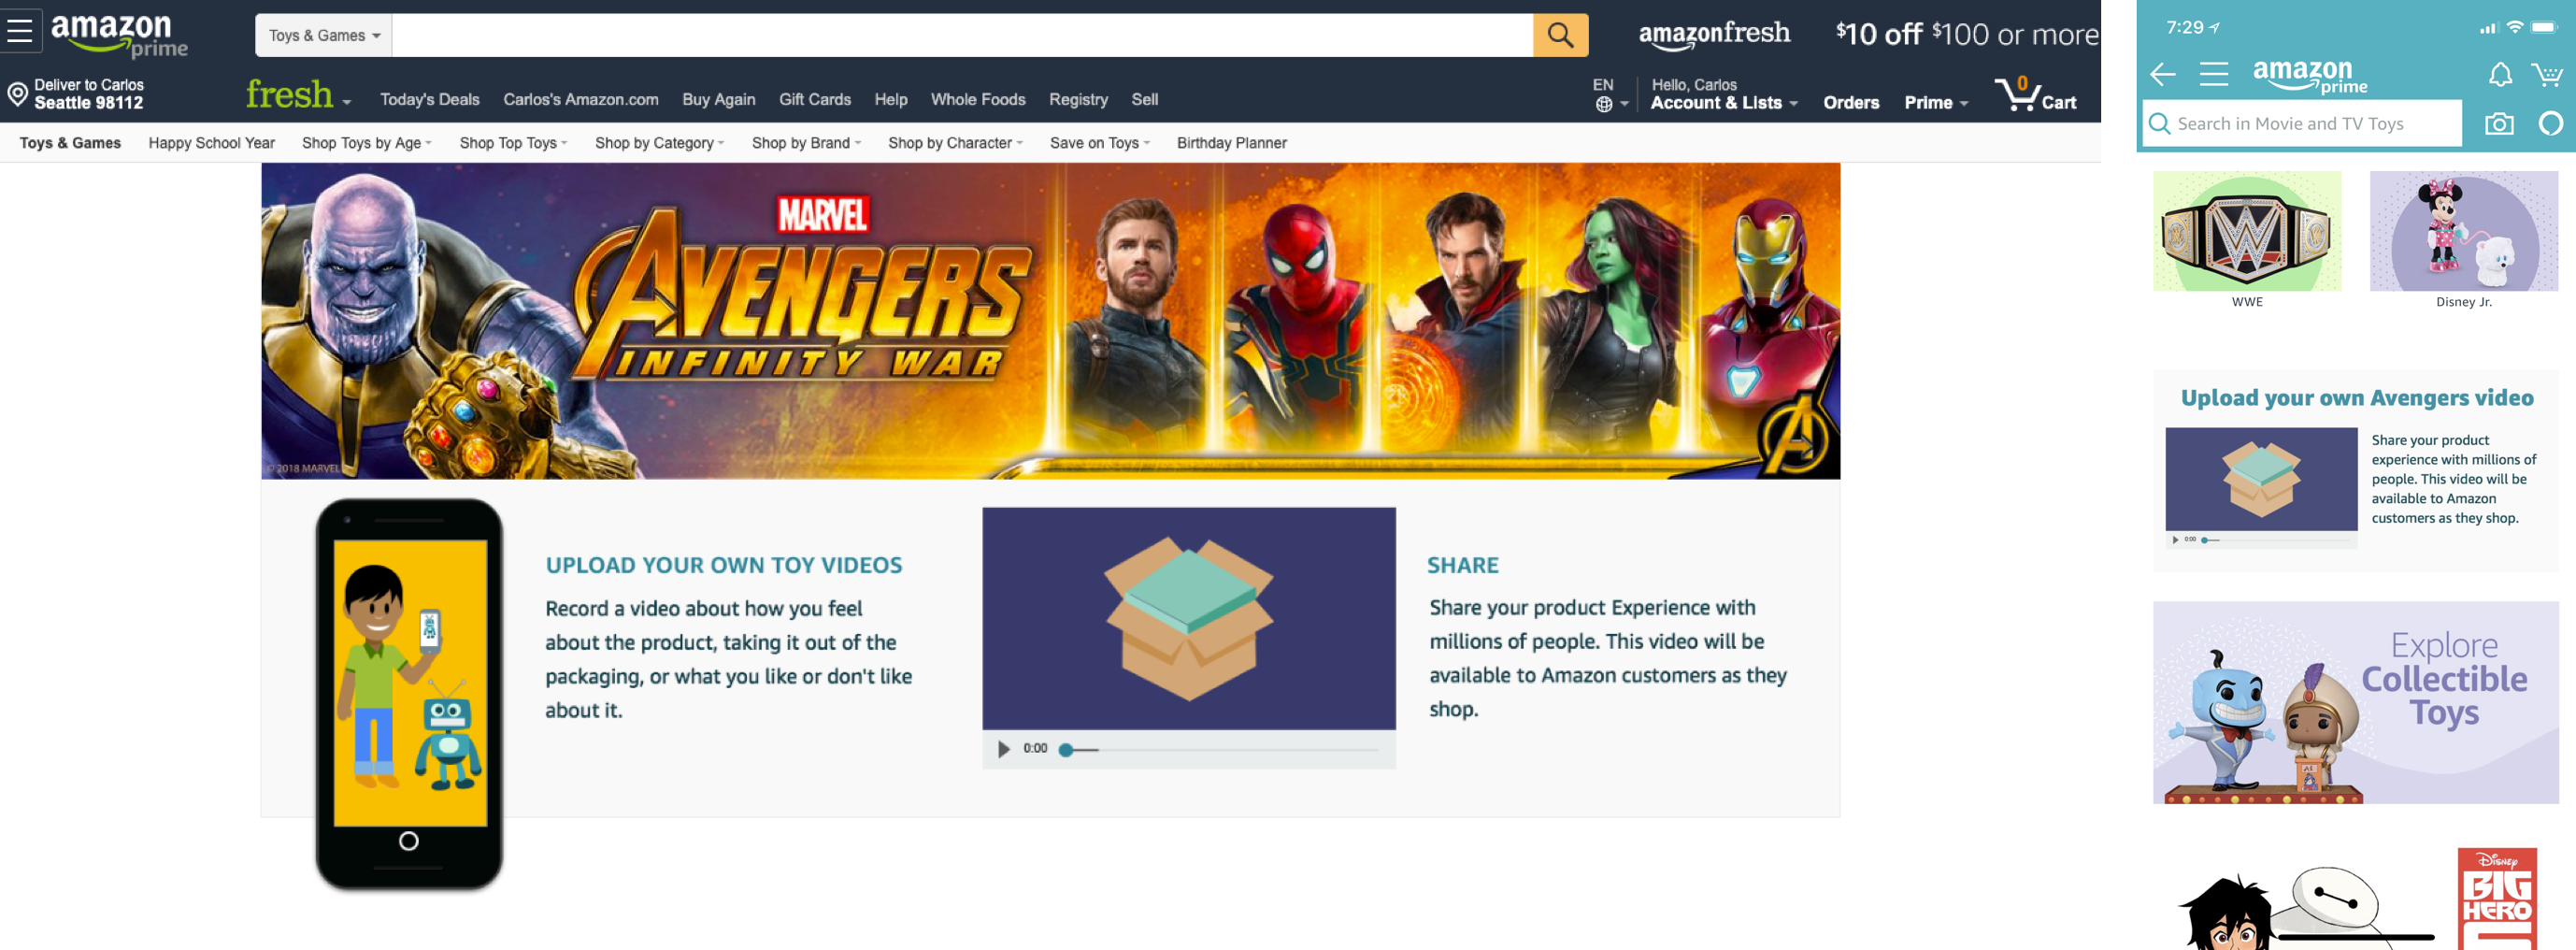 Welcome banner and Hero image used on page at amazon.com.